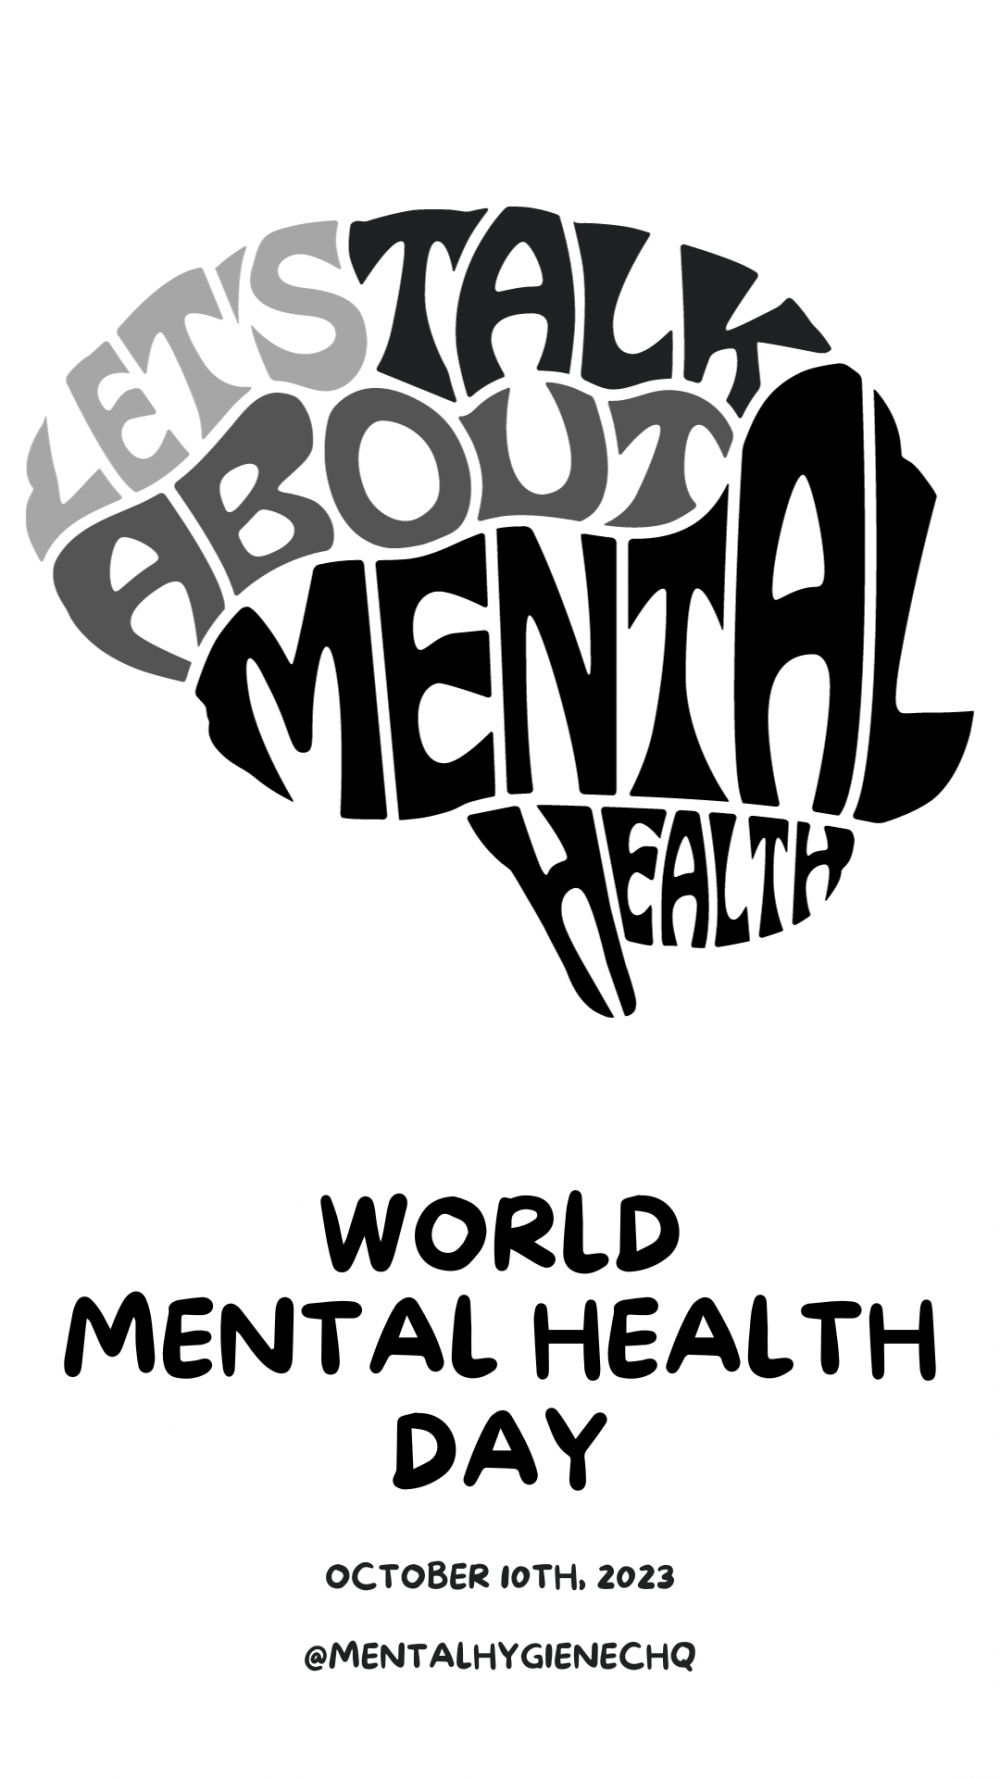 World Mental Health Day Recognized